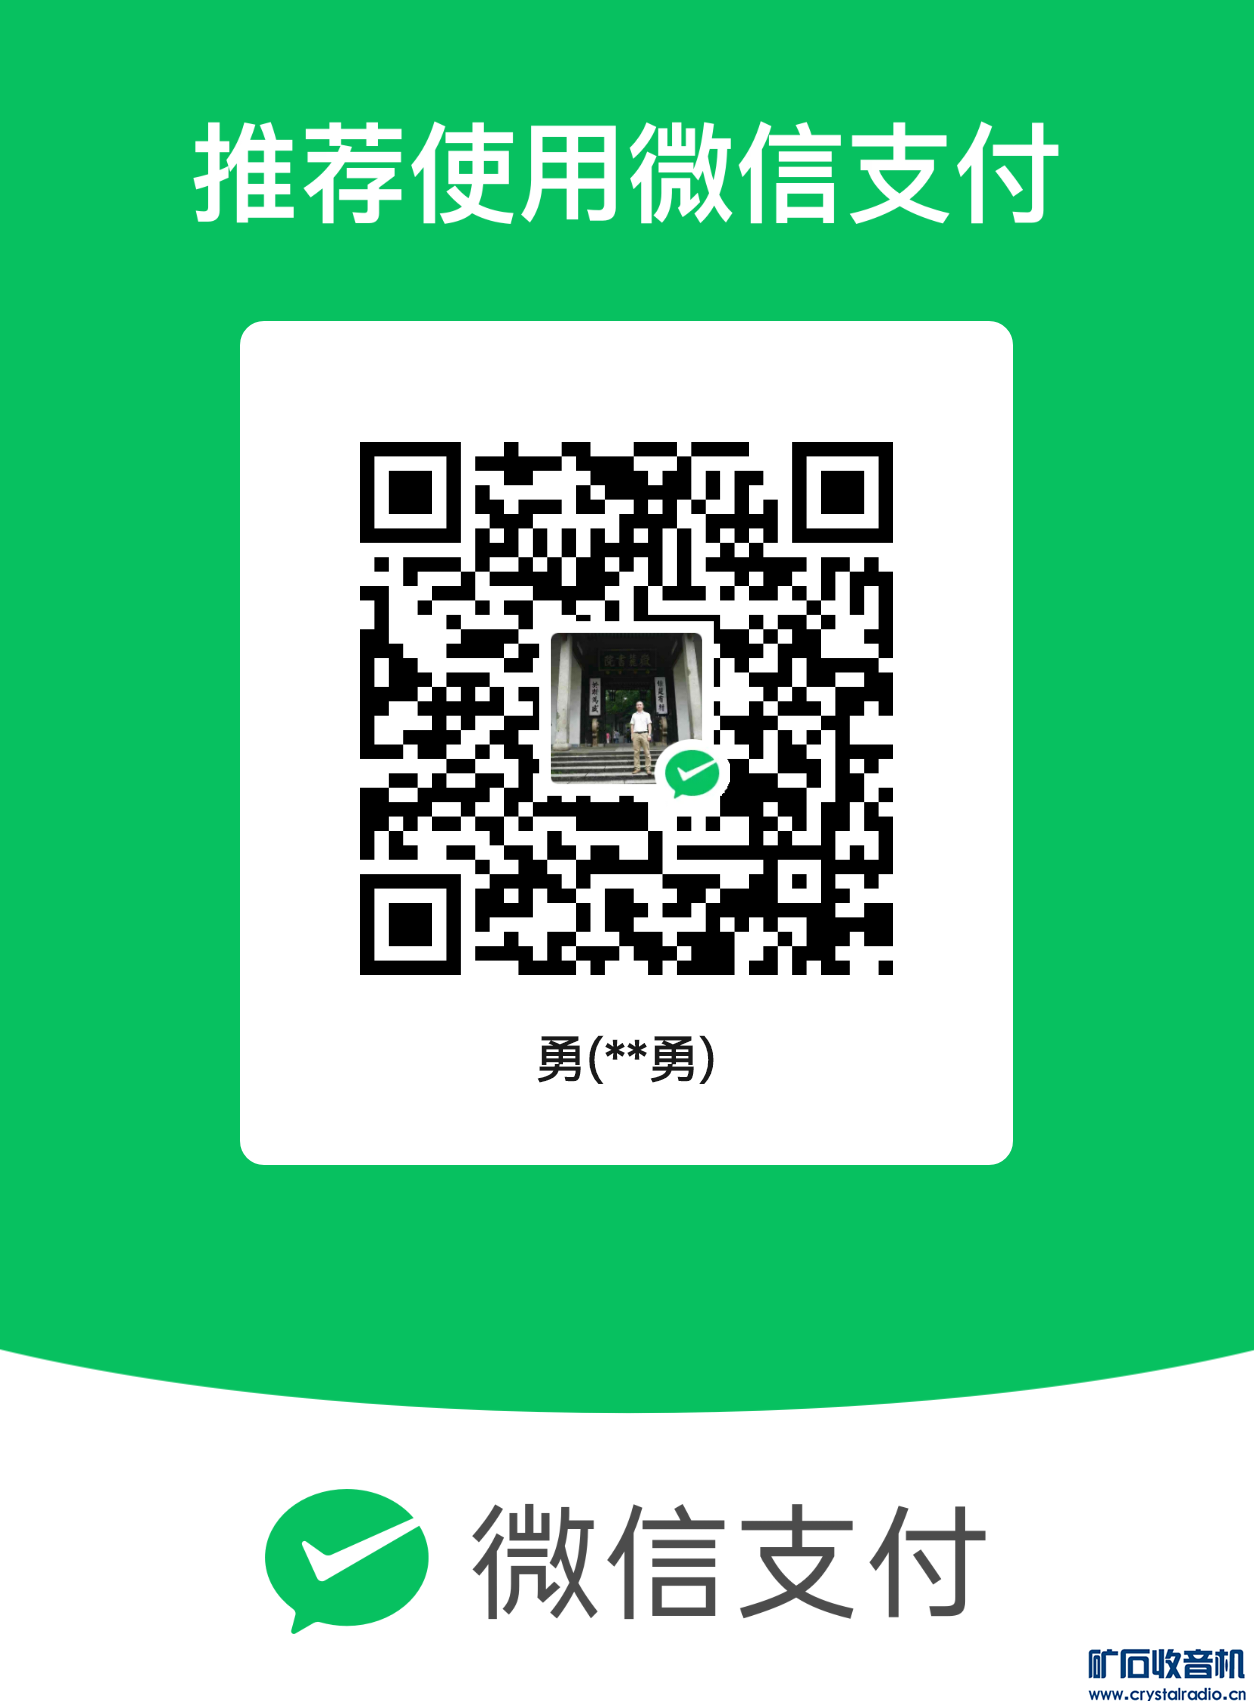 mm_facetoface_collect_qrcode_1683551500354.png